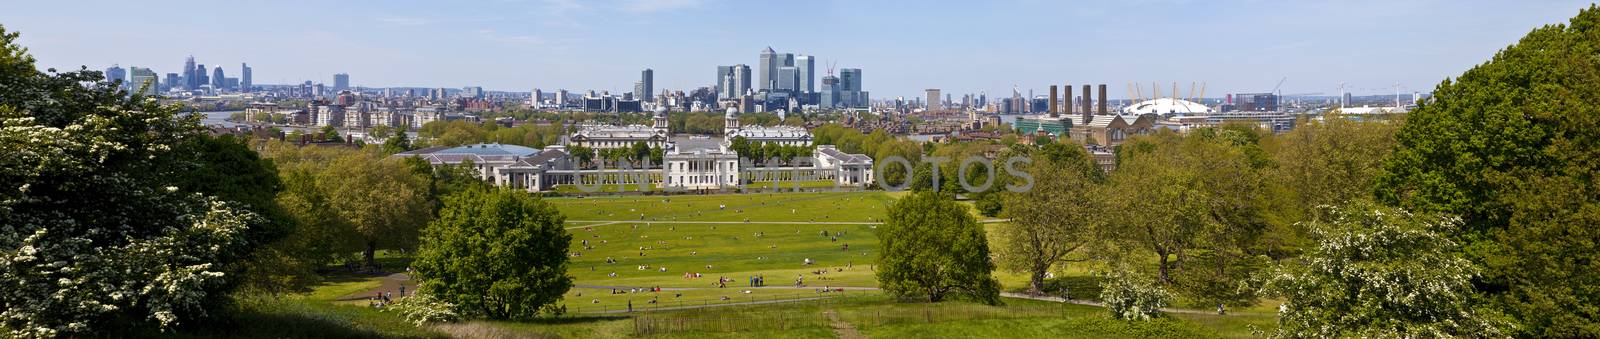 A beautiful panoramic shot taken from the Greenwich Observatory in London.  The view takes in sights such as Docklands, the Royal Naval College, the Gherkin, Millennium Dome, Greenwich Power Station and the River Thames.